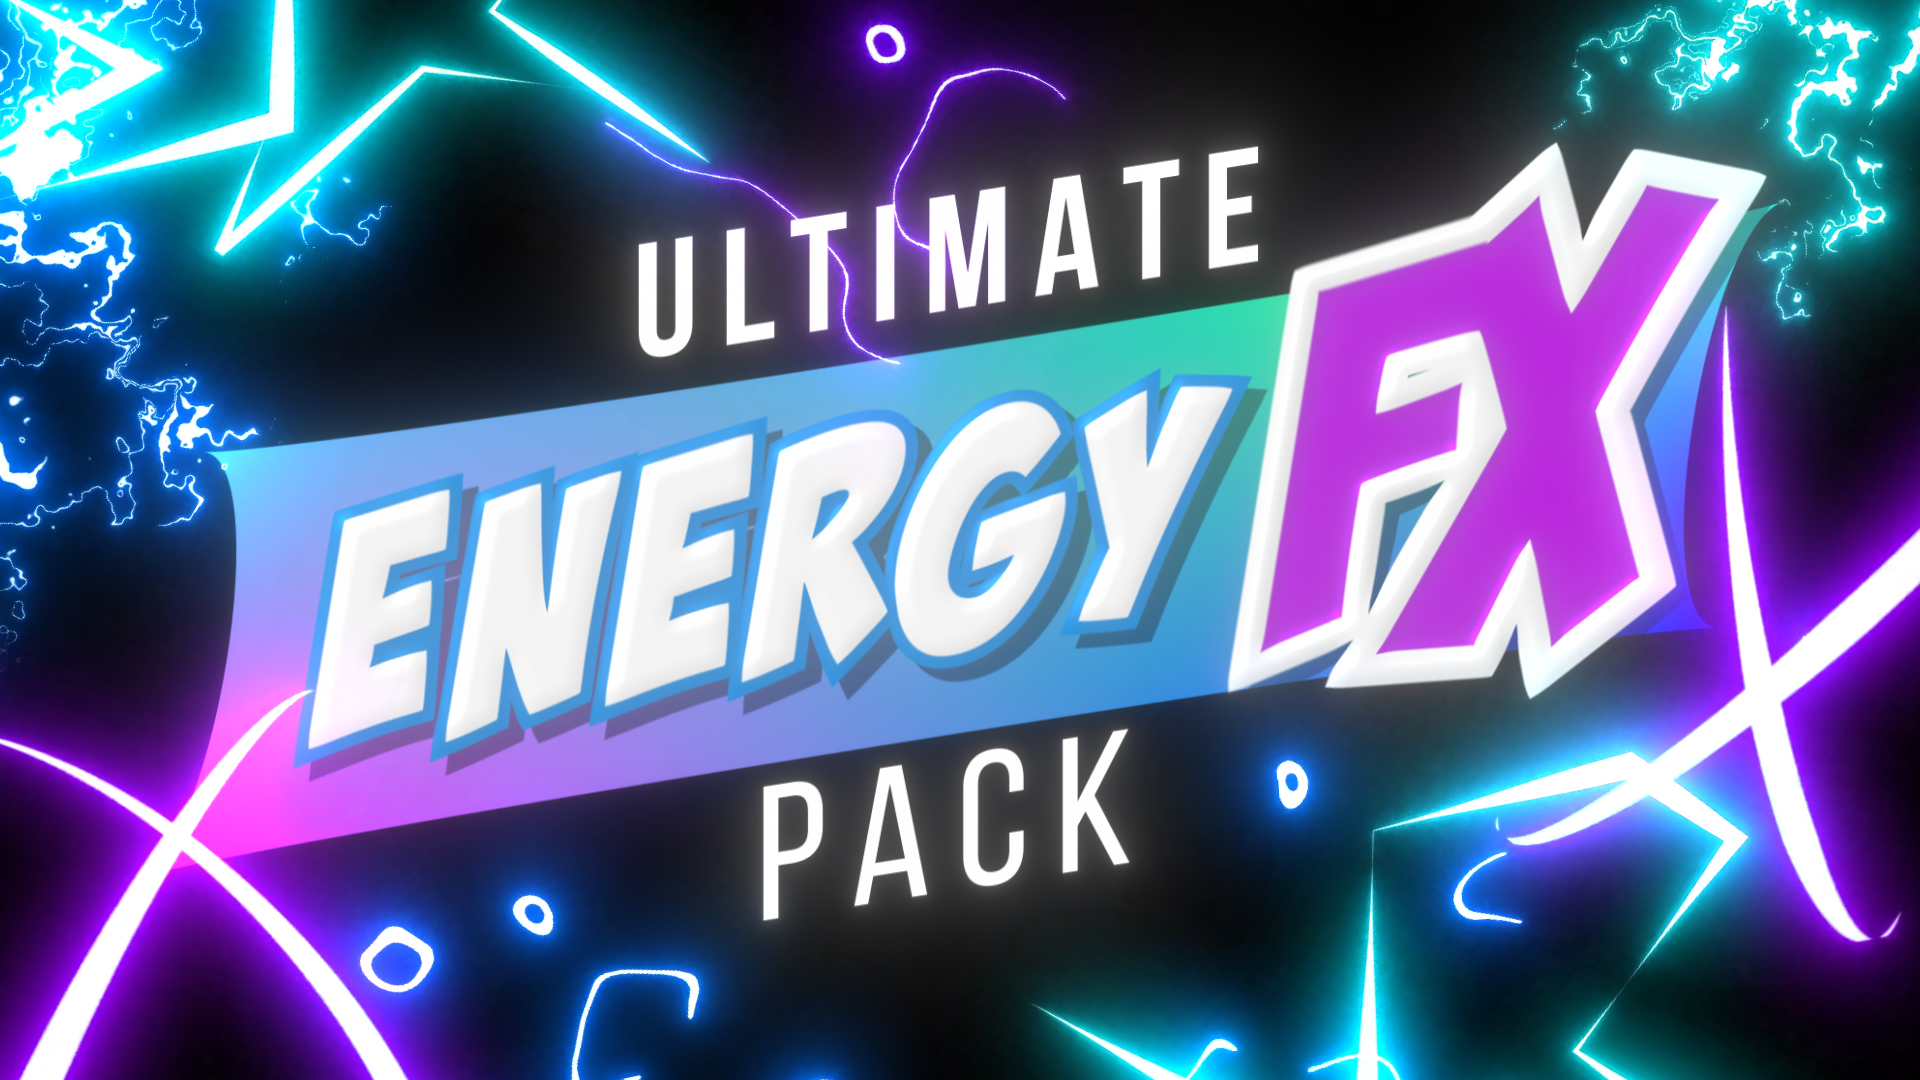 Ultimate Animated Energy Flash FX and Explosions HD